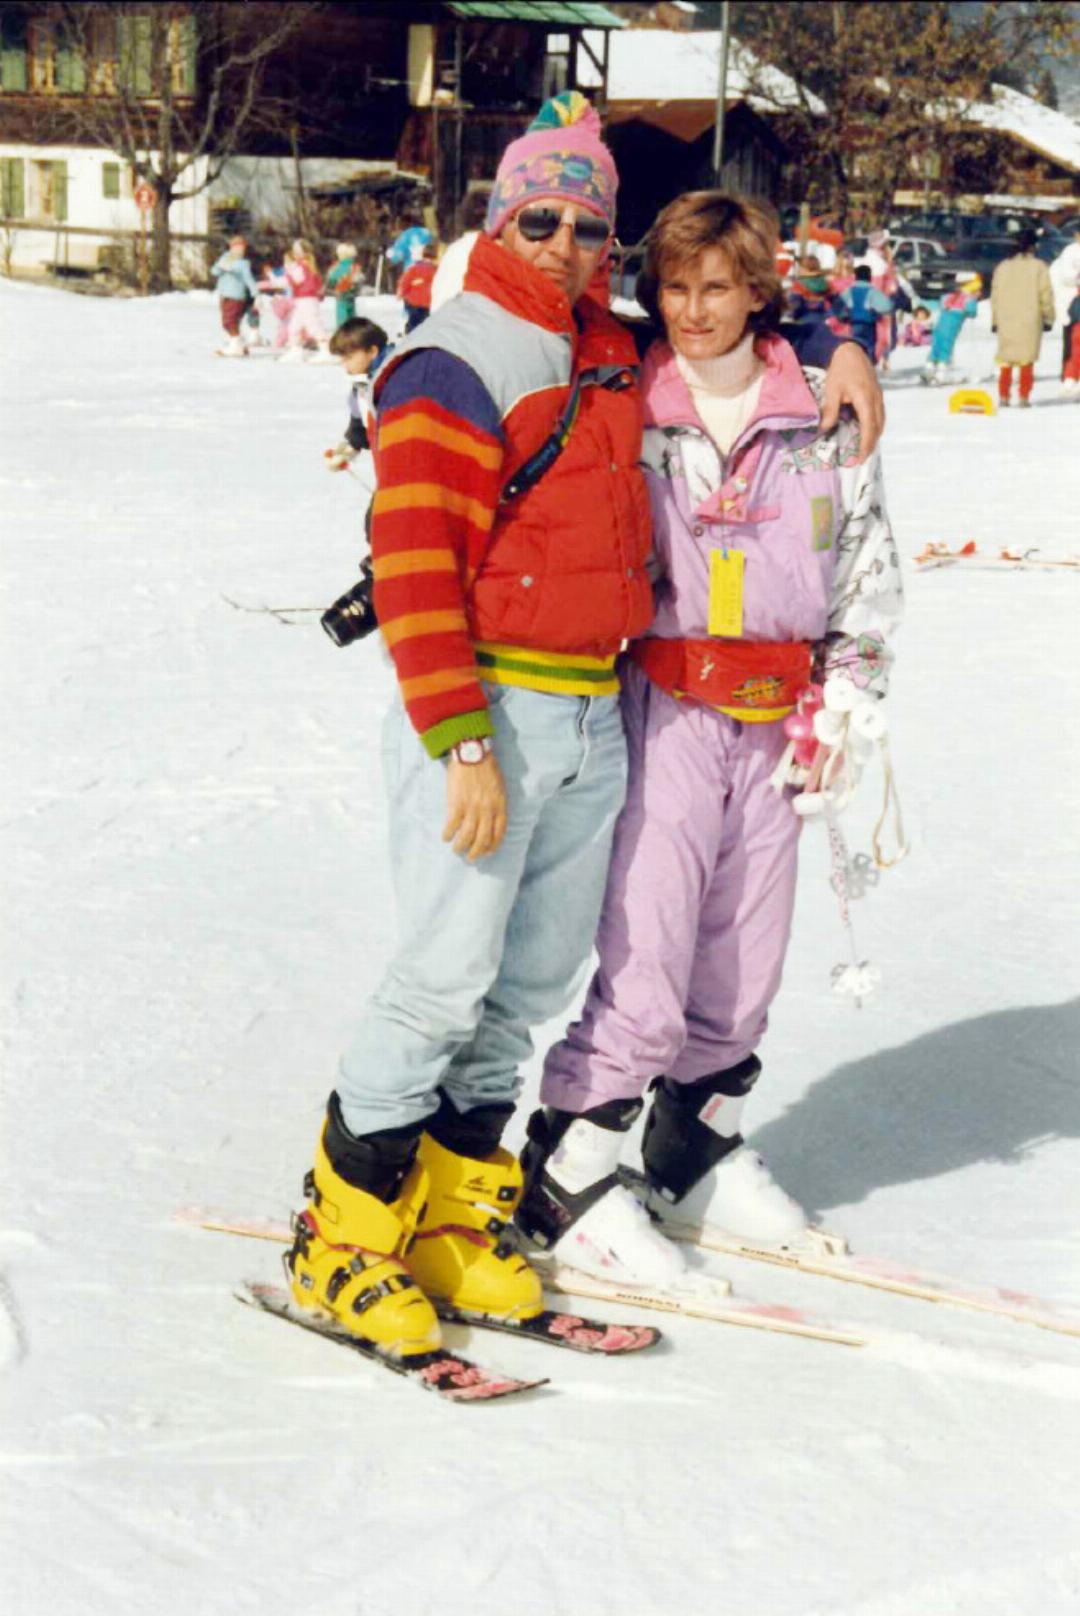 1992, with my wife and my Big Foot skis